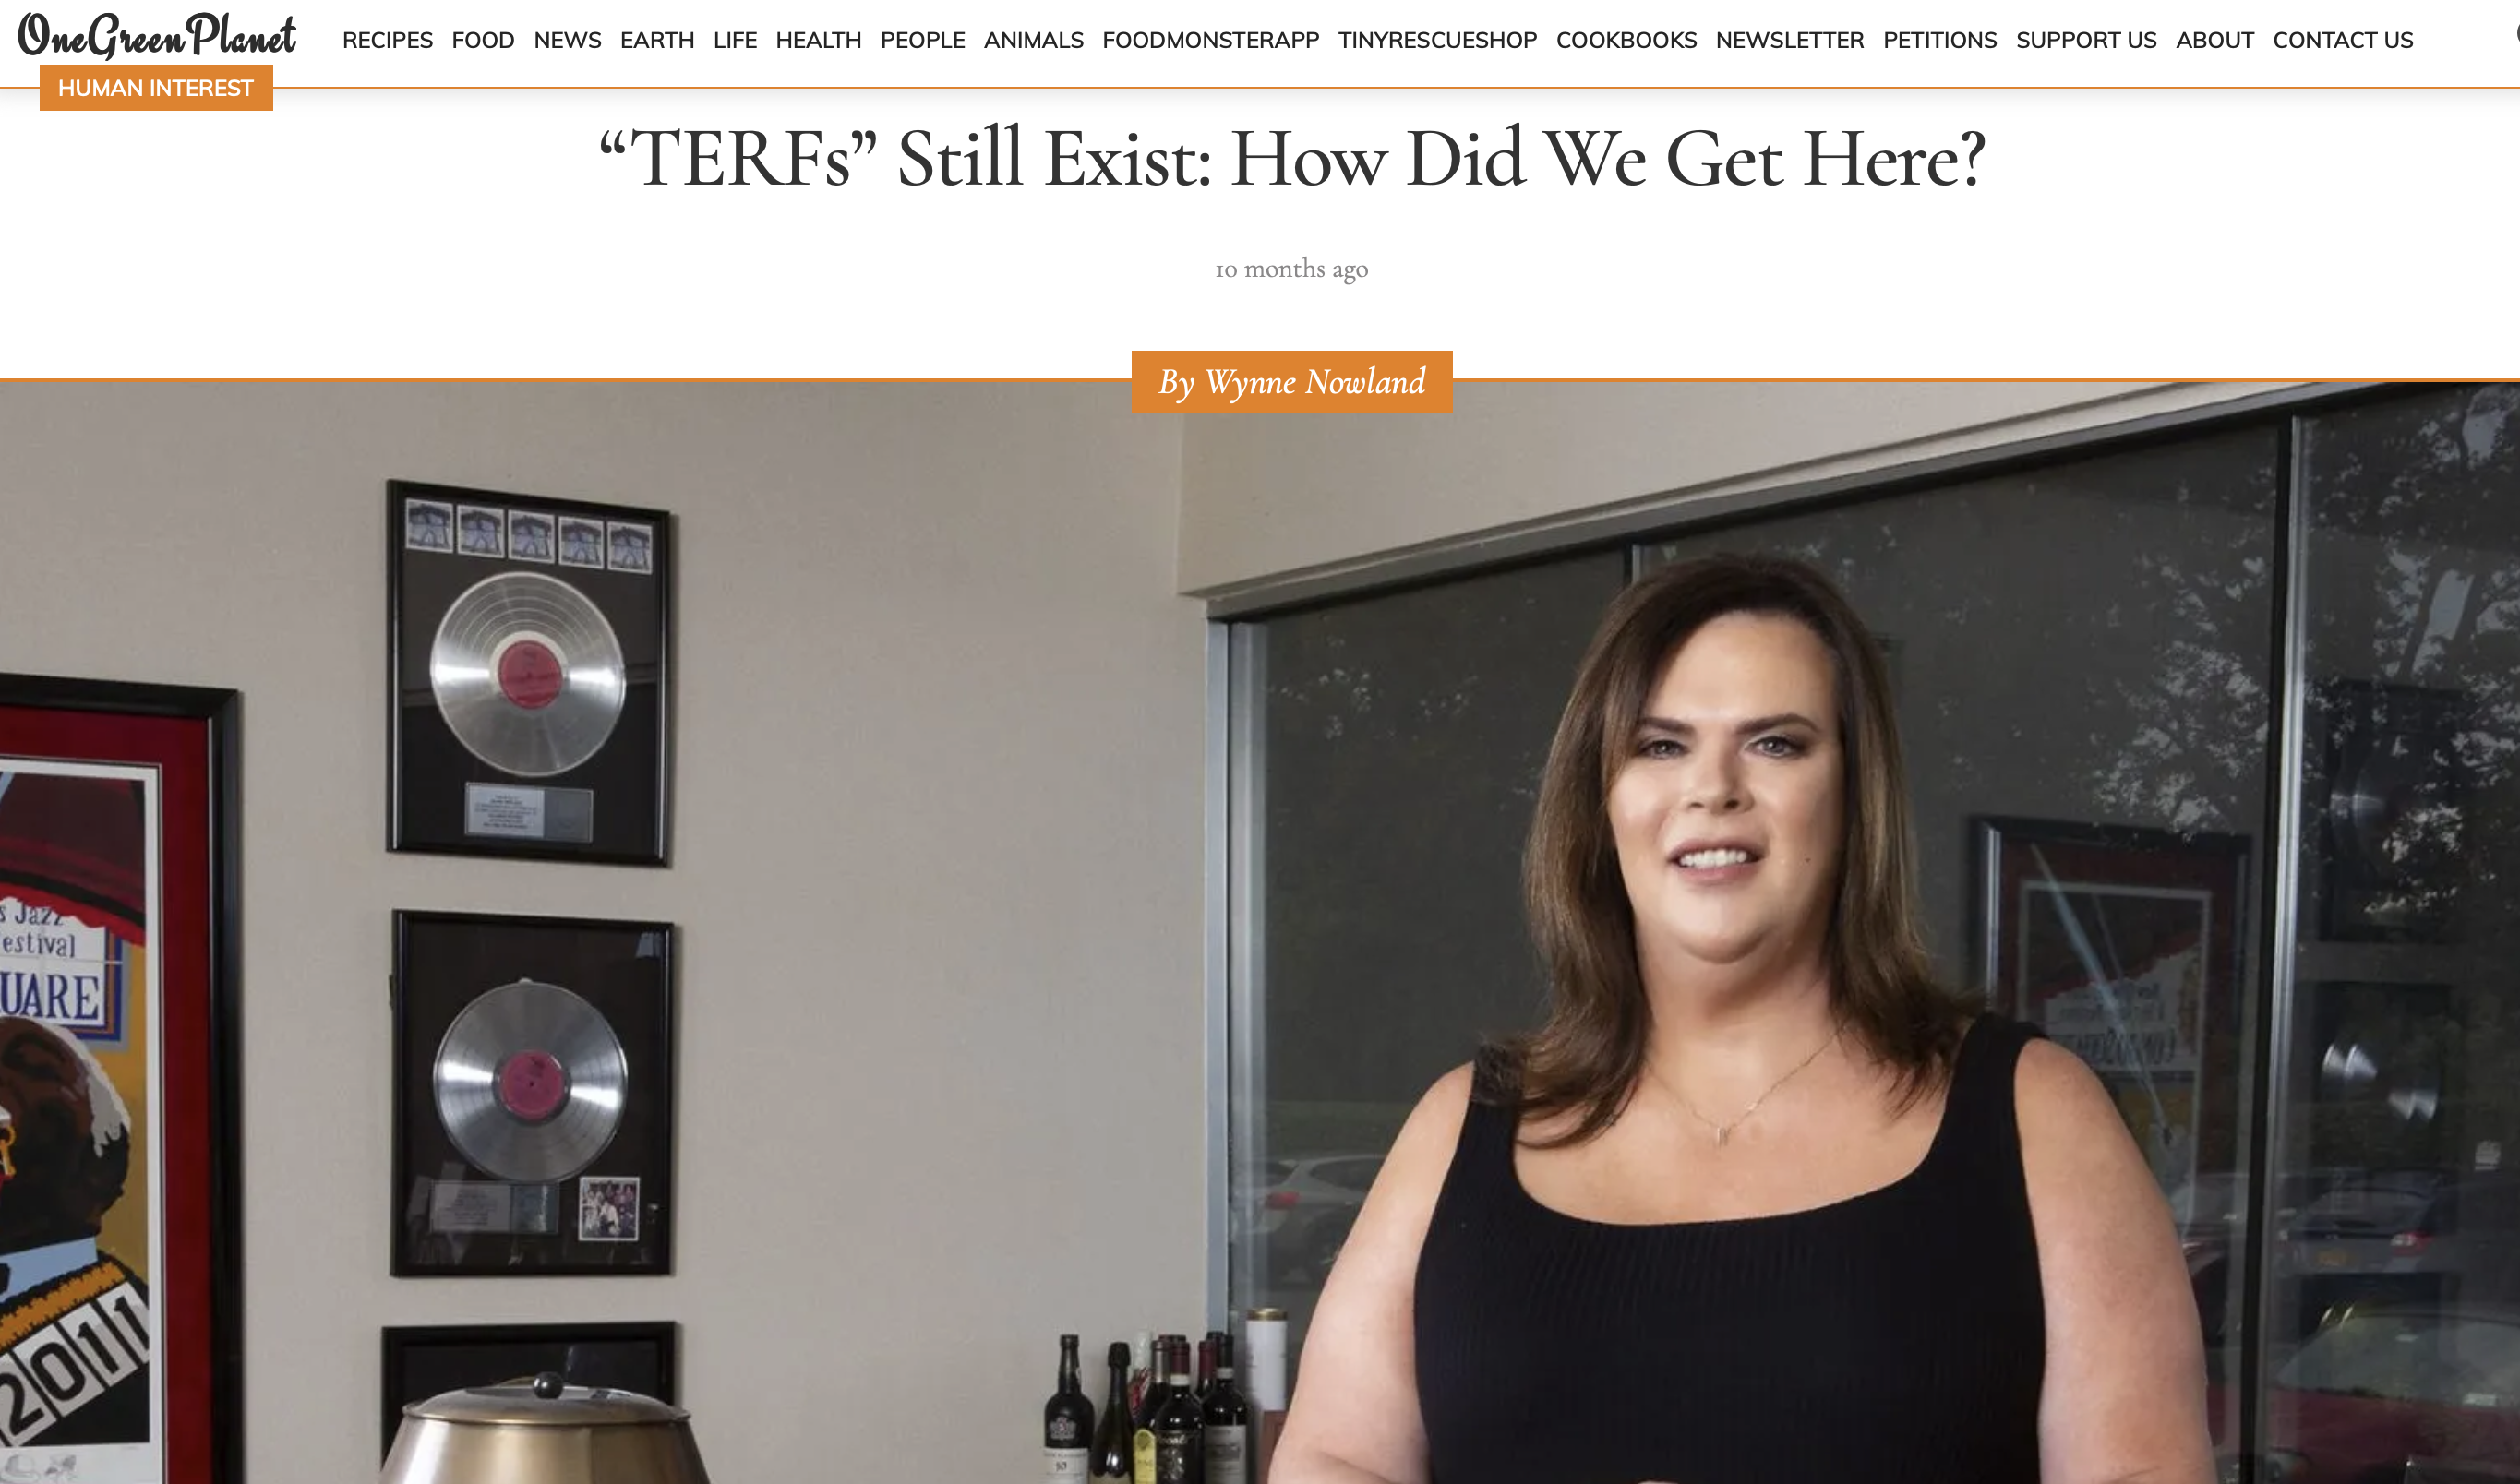 terfs-still-exist-how-did-we-get-here